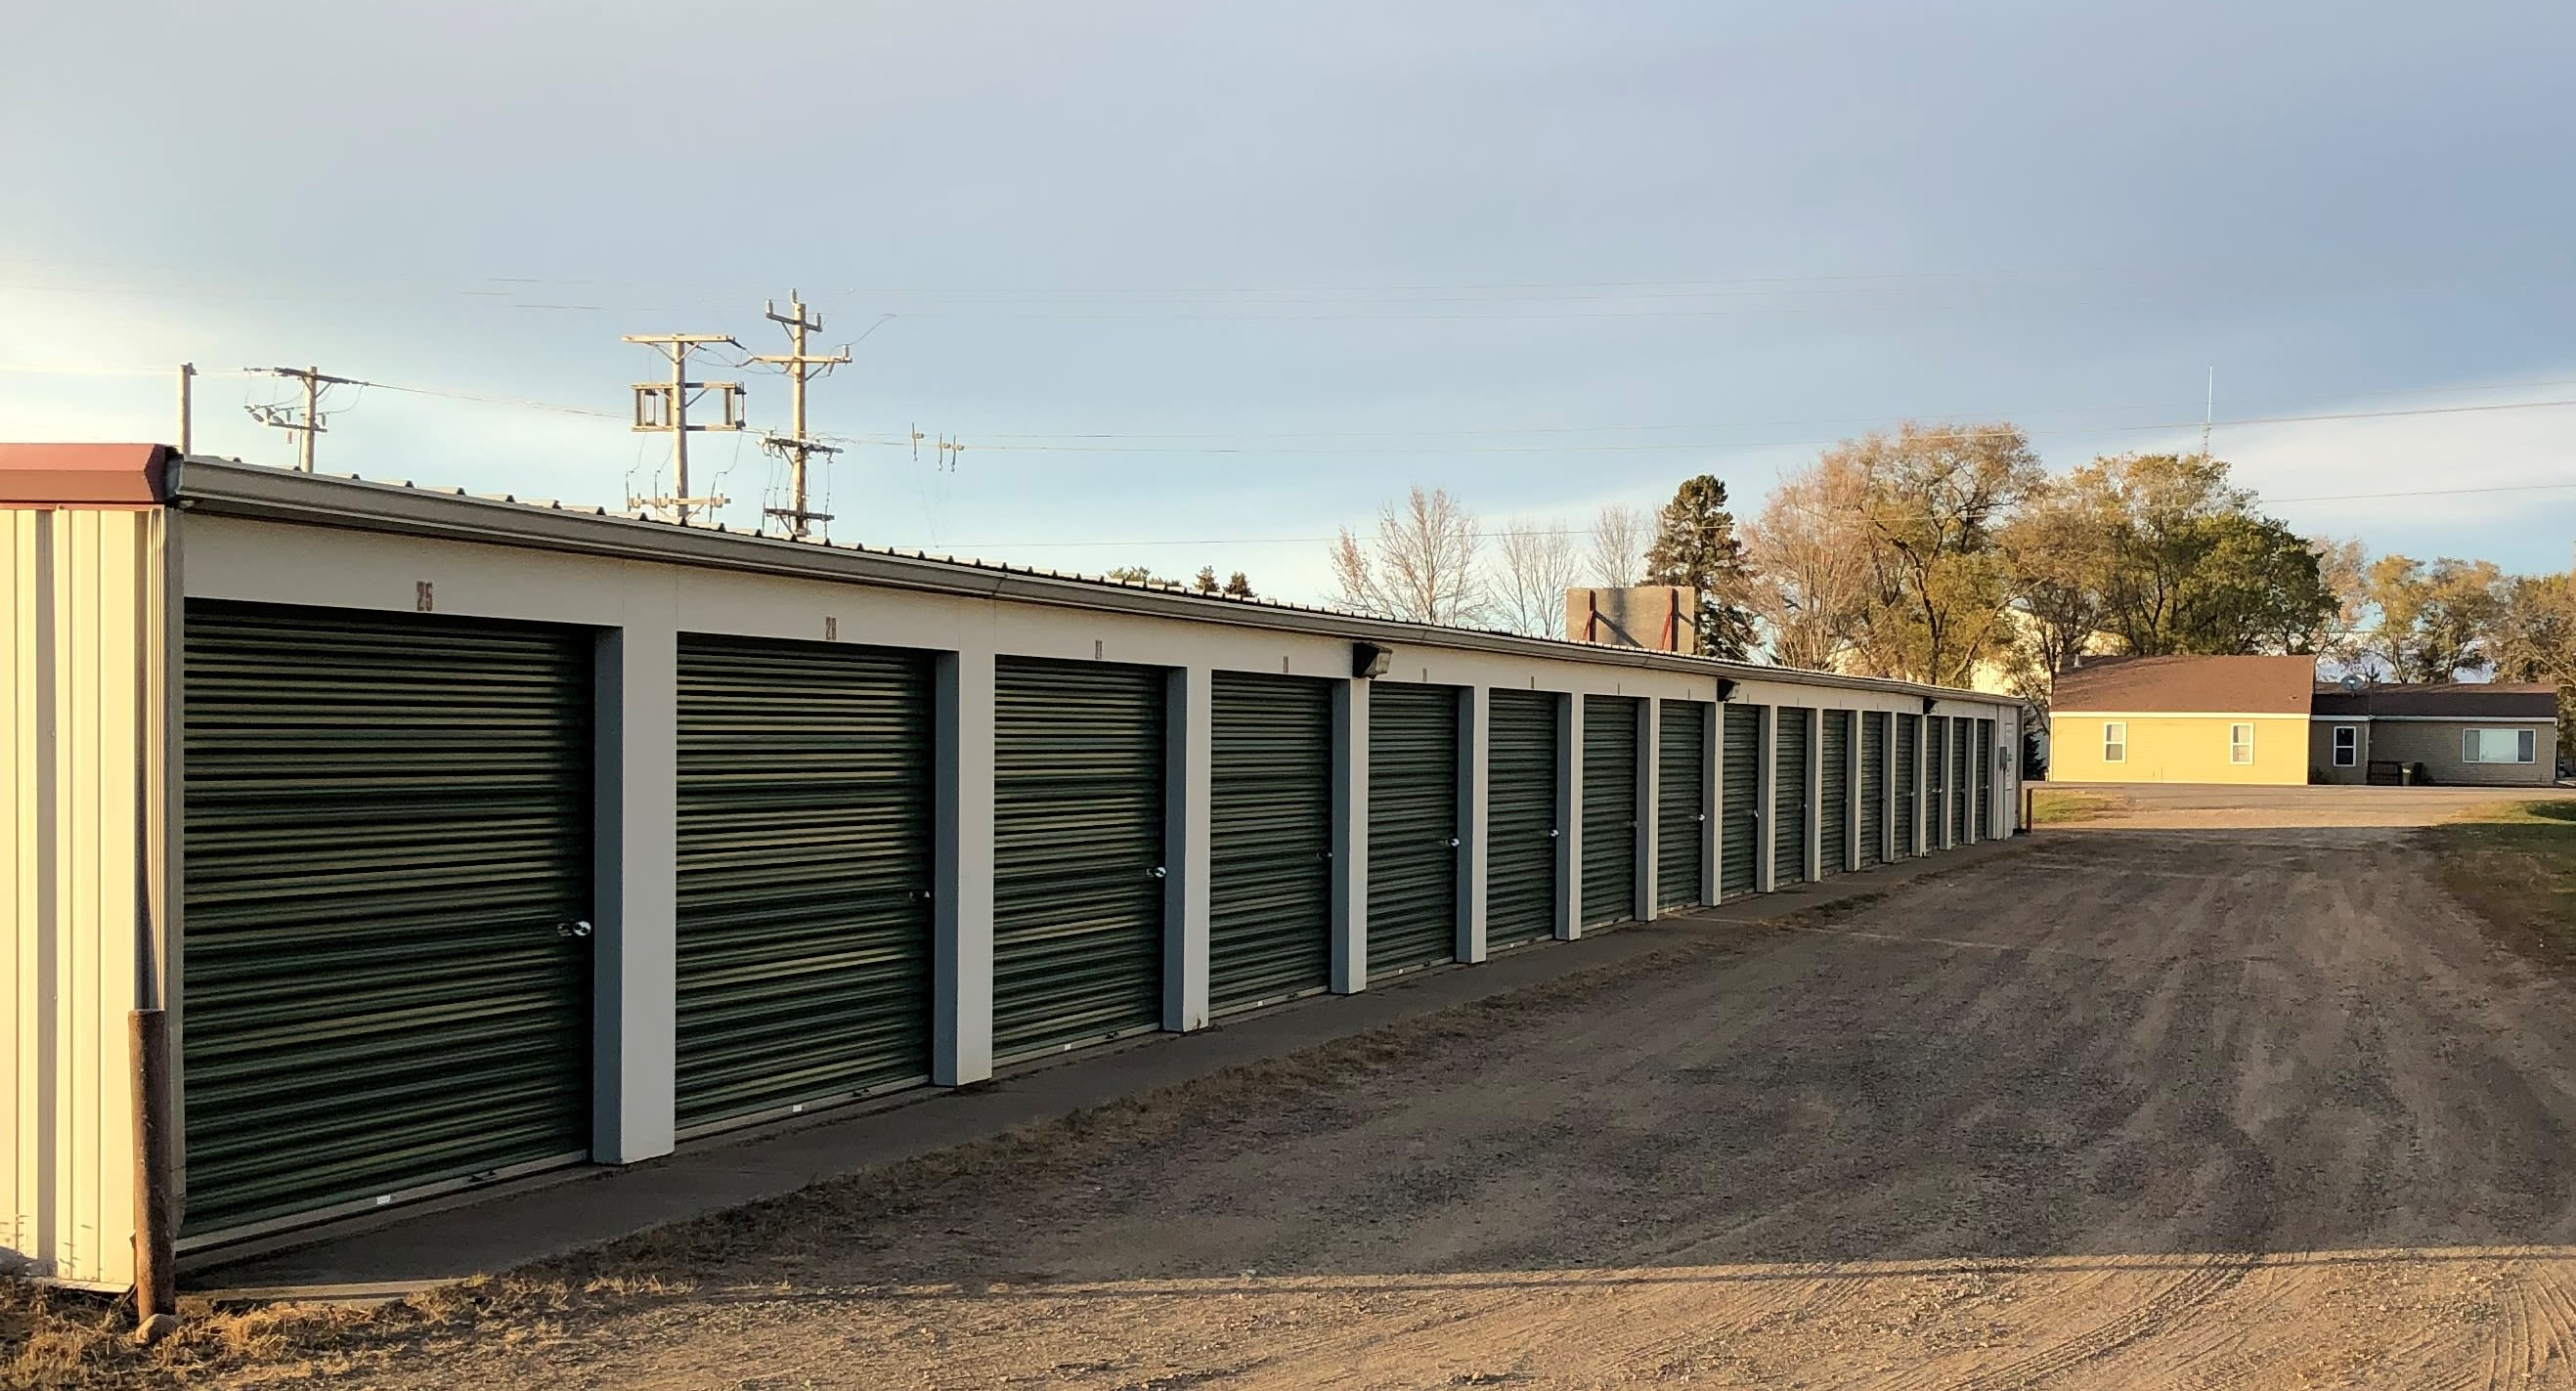 Unit sizes and prices at KO Storage in Pierz, Minnesota